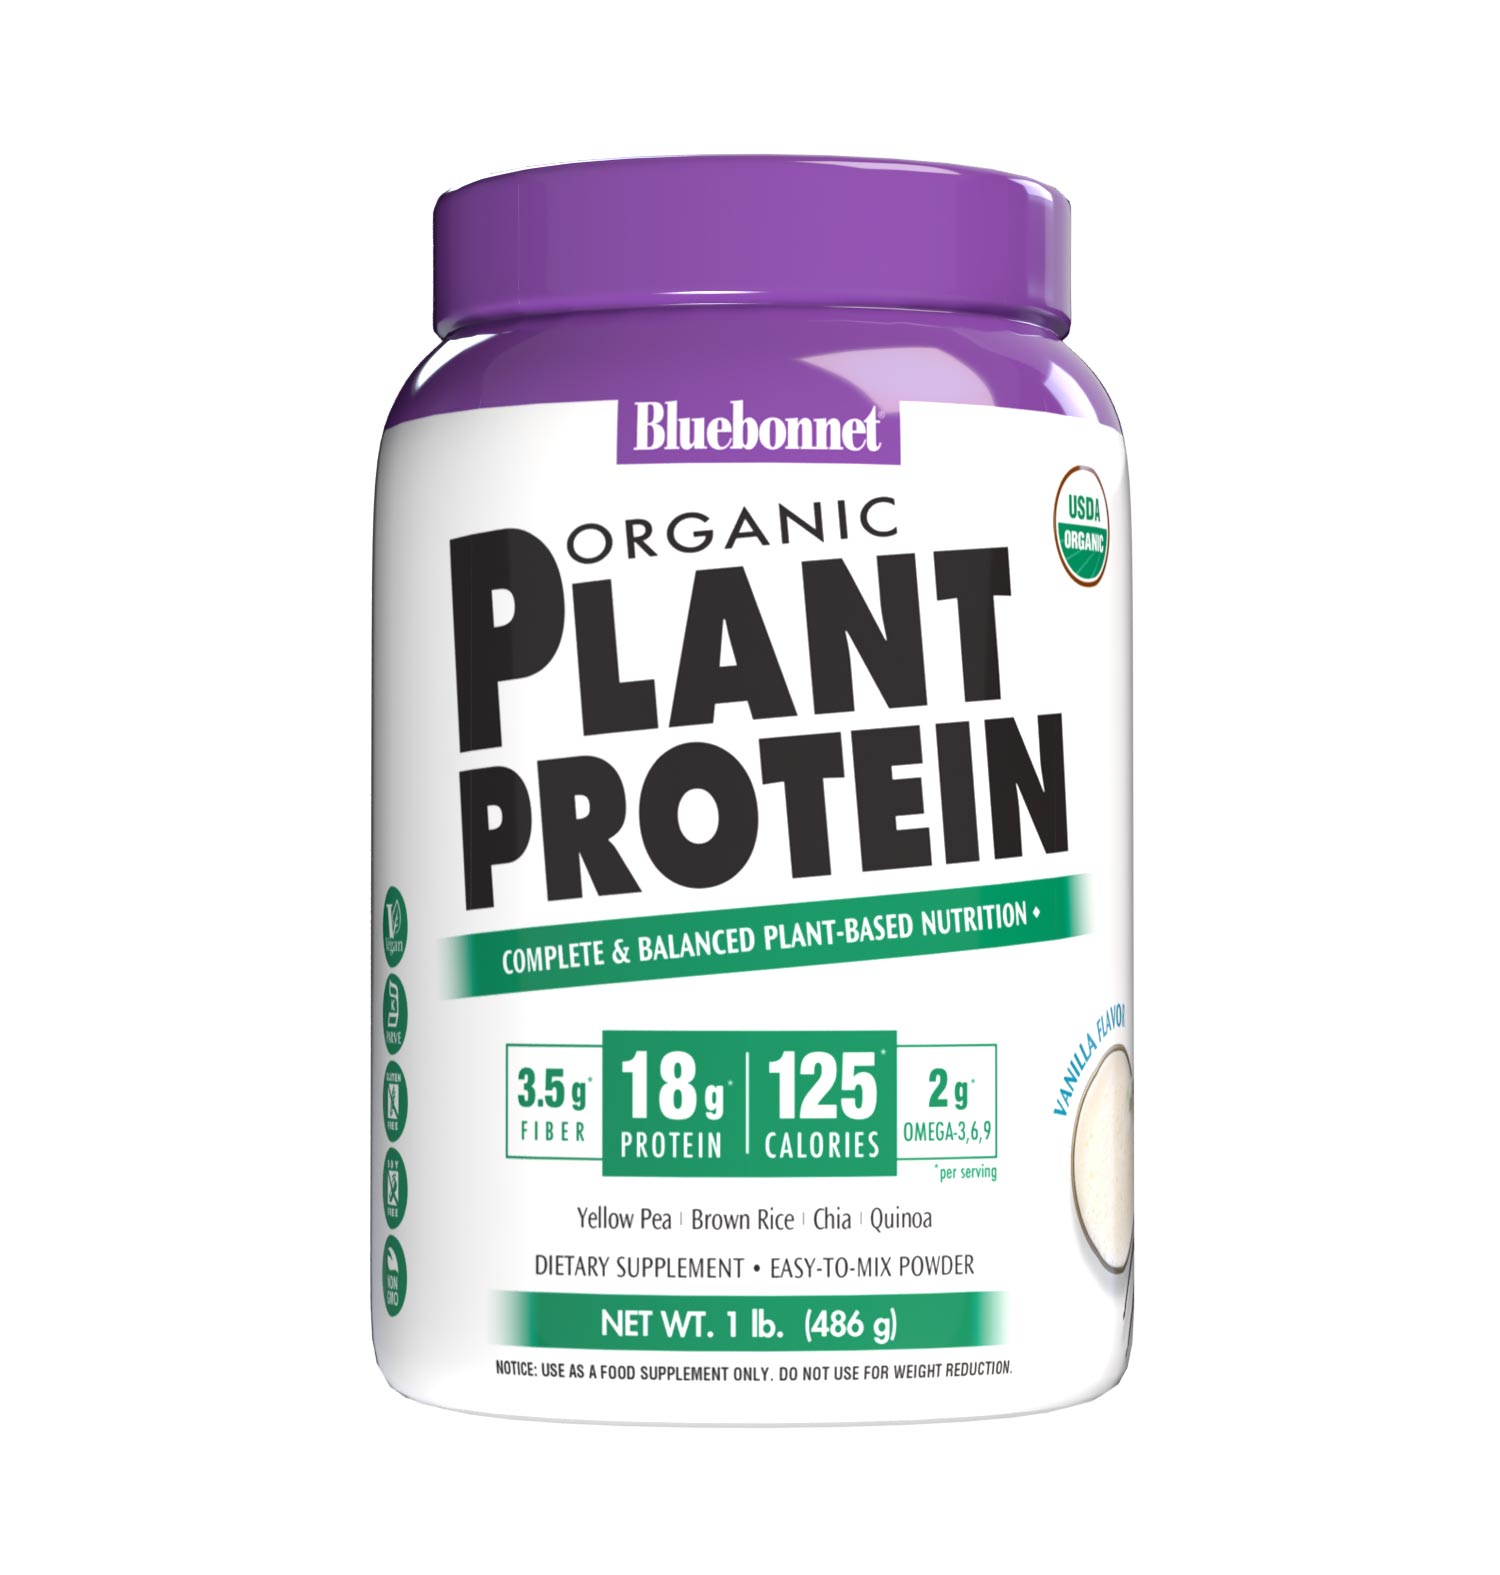 Bluebonnet’s Organic Plant Protein Vanilla flavored Powder provides significant quantities of sustainably harvested plant proteins: Organic sprouted whole grain brown rice protein concentrate, Organic yellow pea protein isolate, Organic chia sprout protein, Organic instantized quinoa seed protein. This unique blend of four powerful plant proteins collectively delivers a balance of all nine essential amino acids similar to high-quality animal protein. #size_1 lb